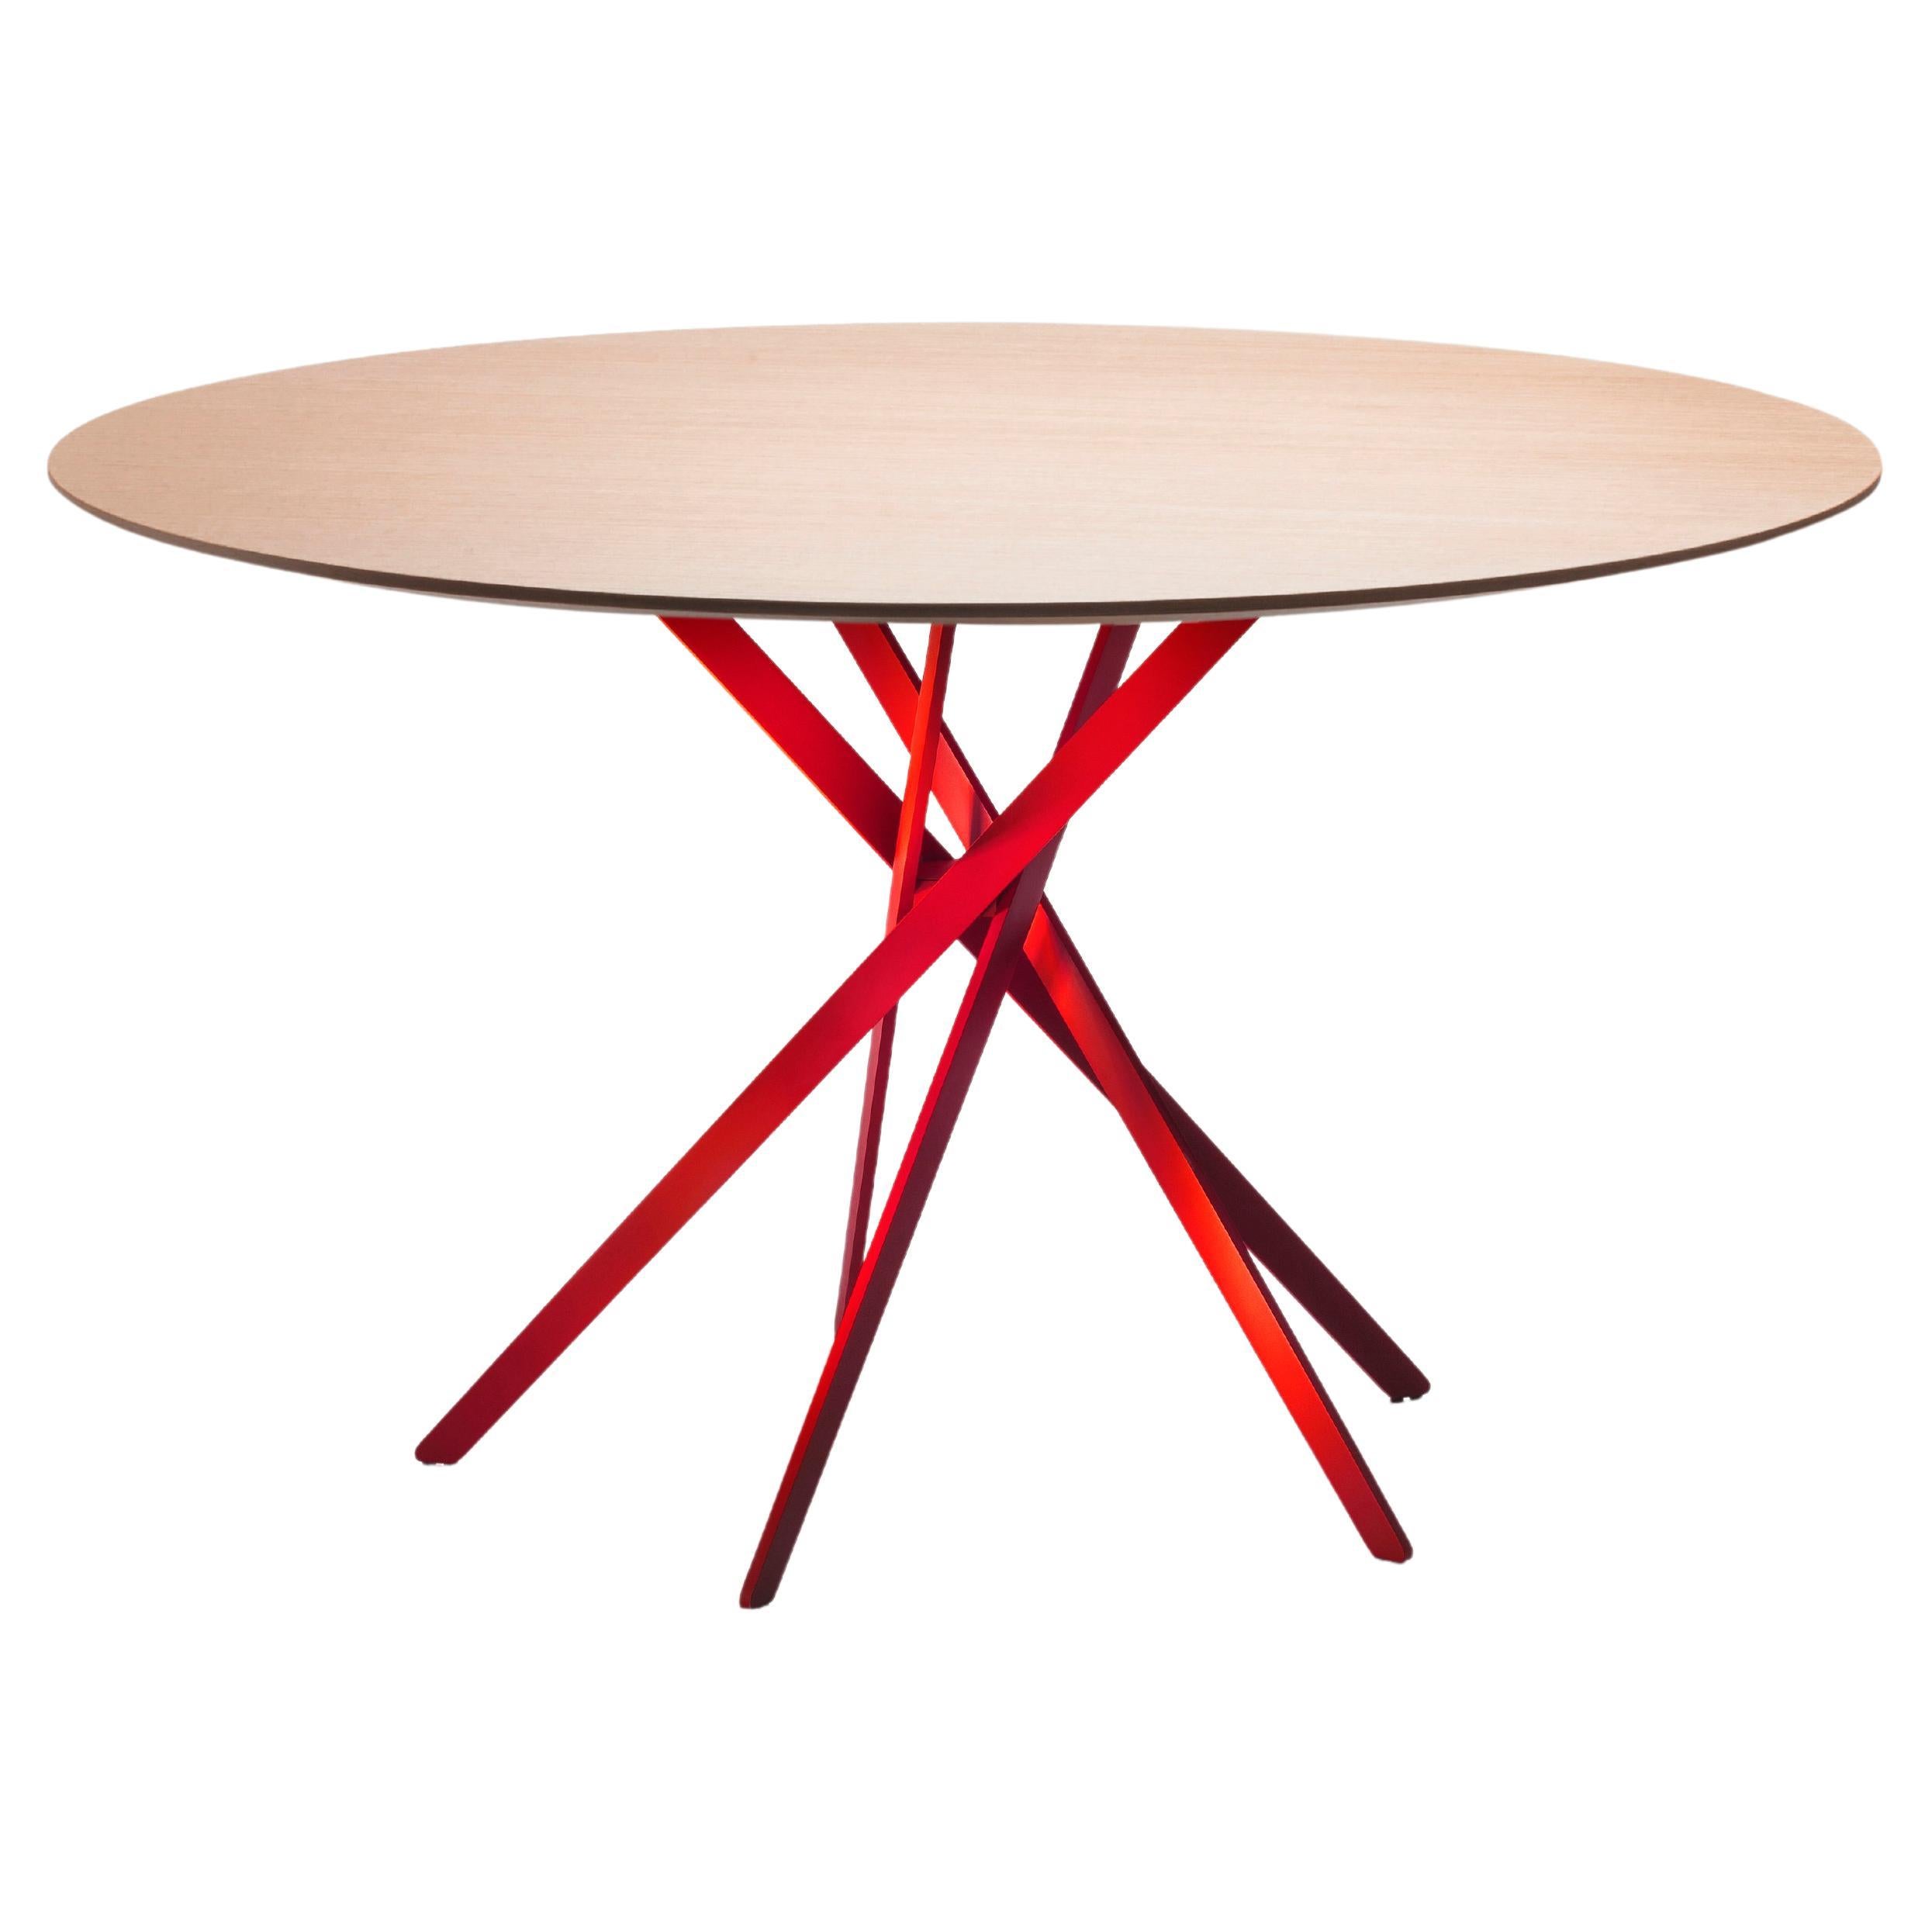 Adentro IKI dining table by Marco Zanuso jr. Natural Oak top & red base